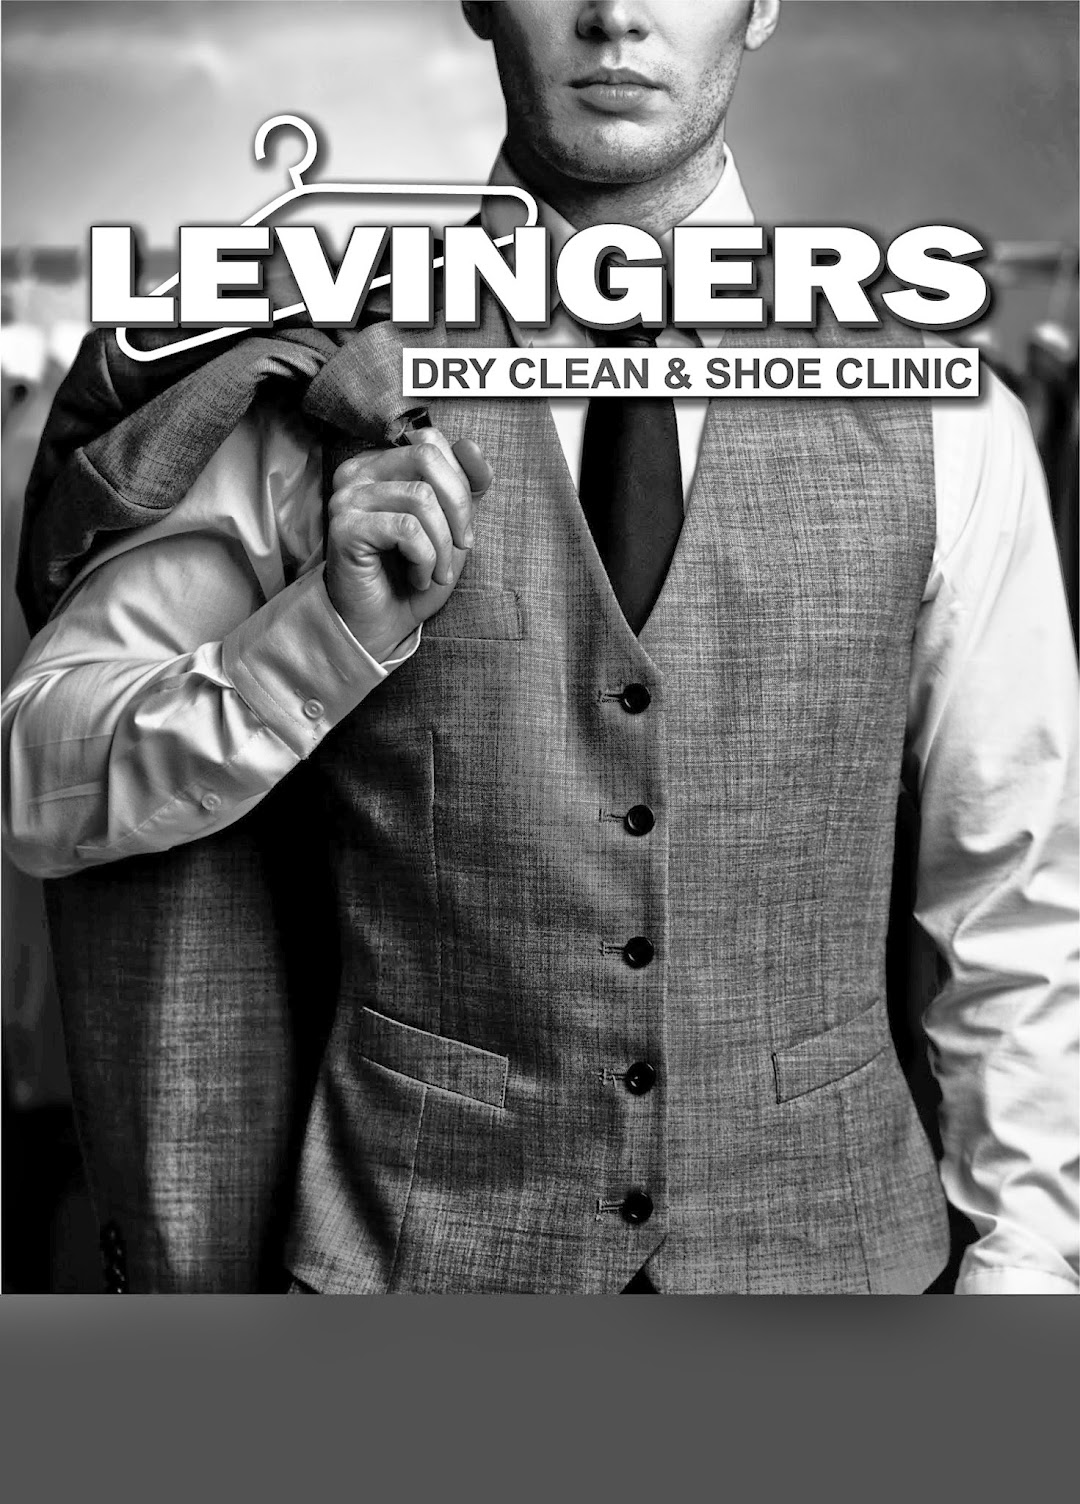 Levingers Dry Cleaners and Shoe Clinic